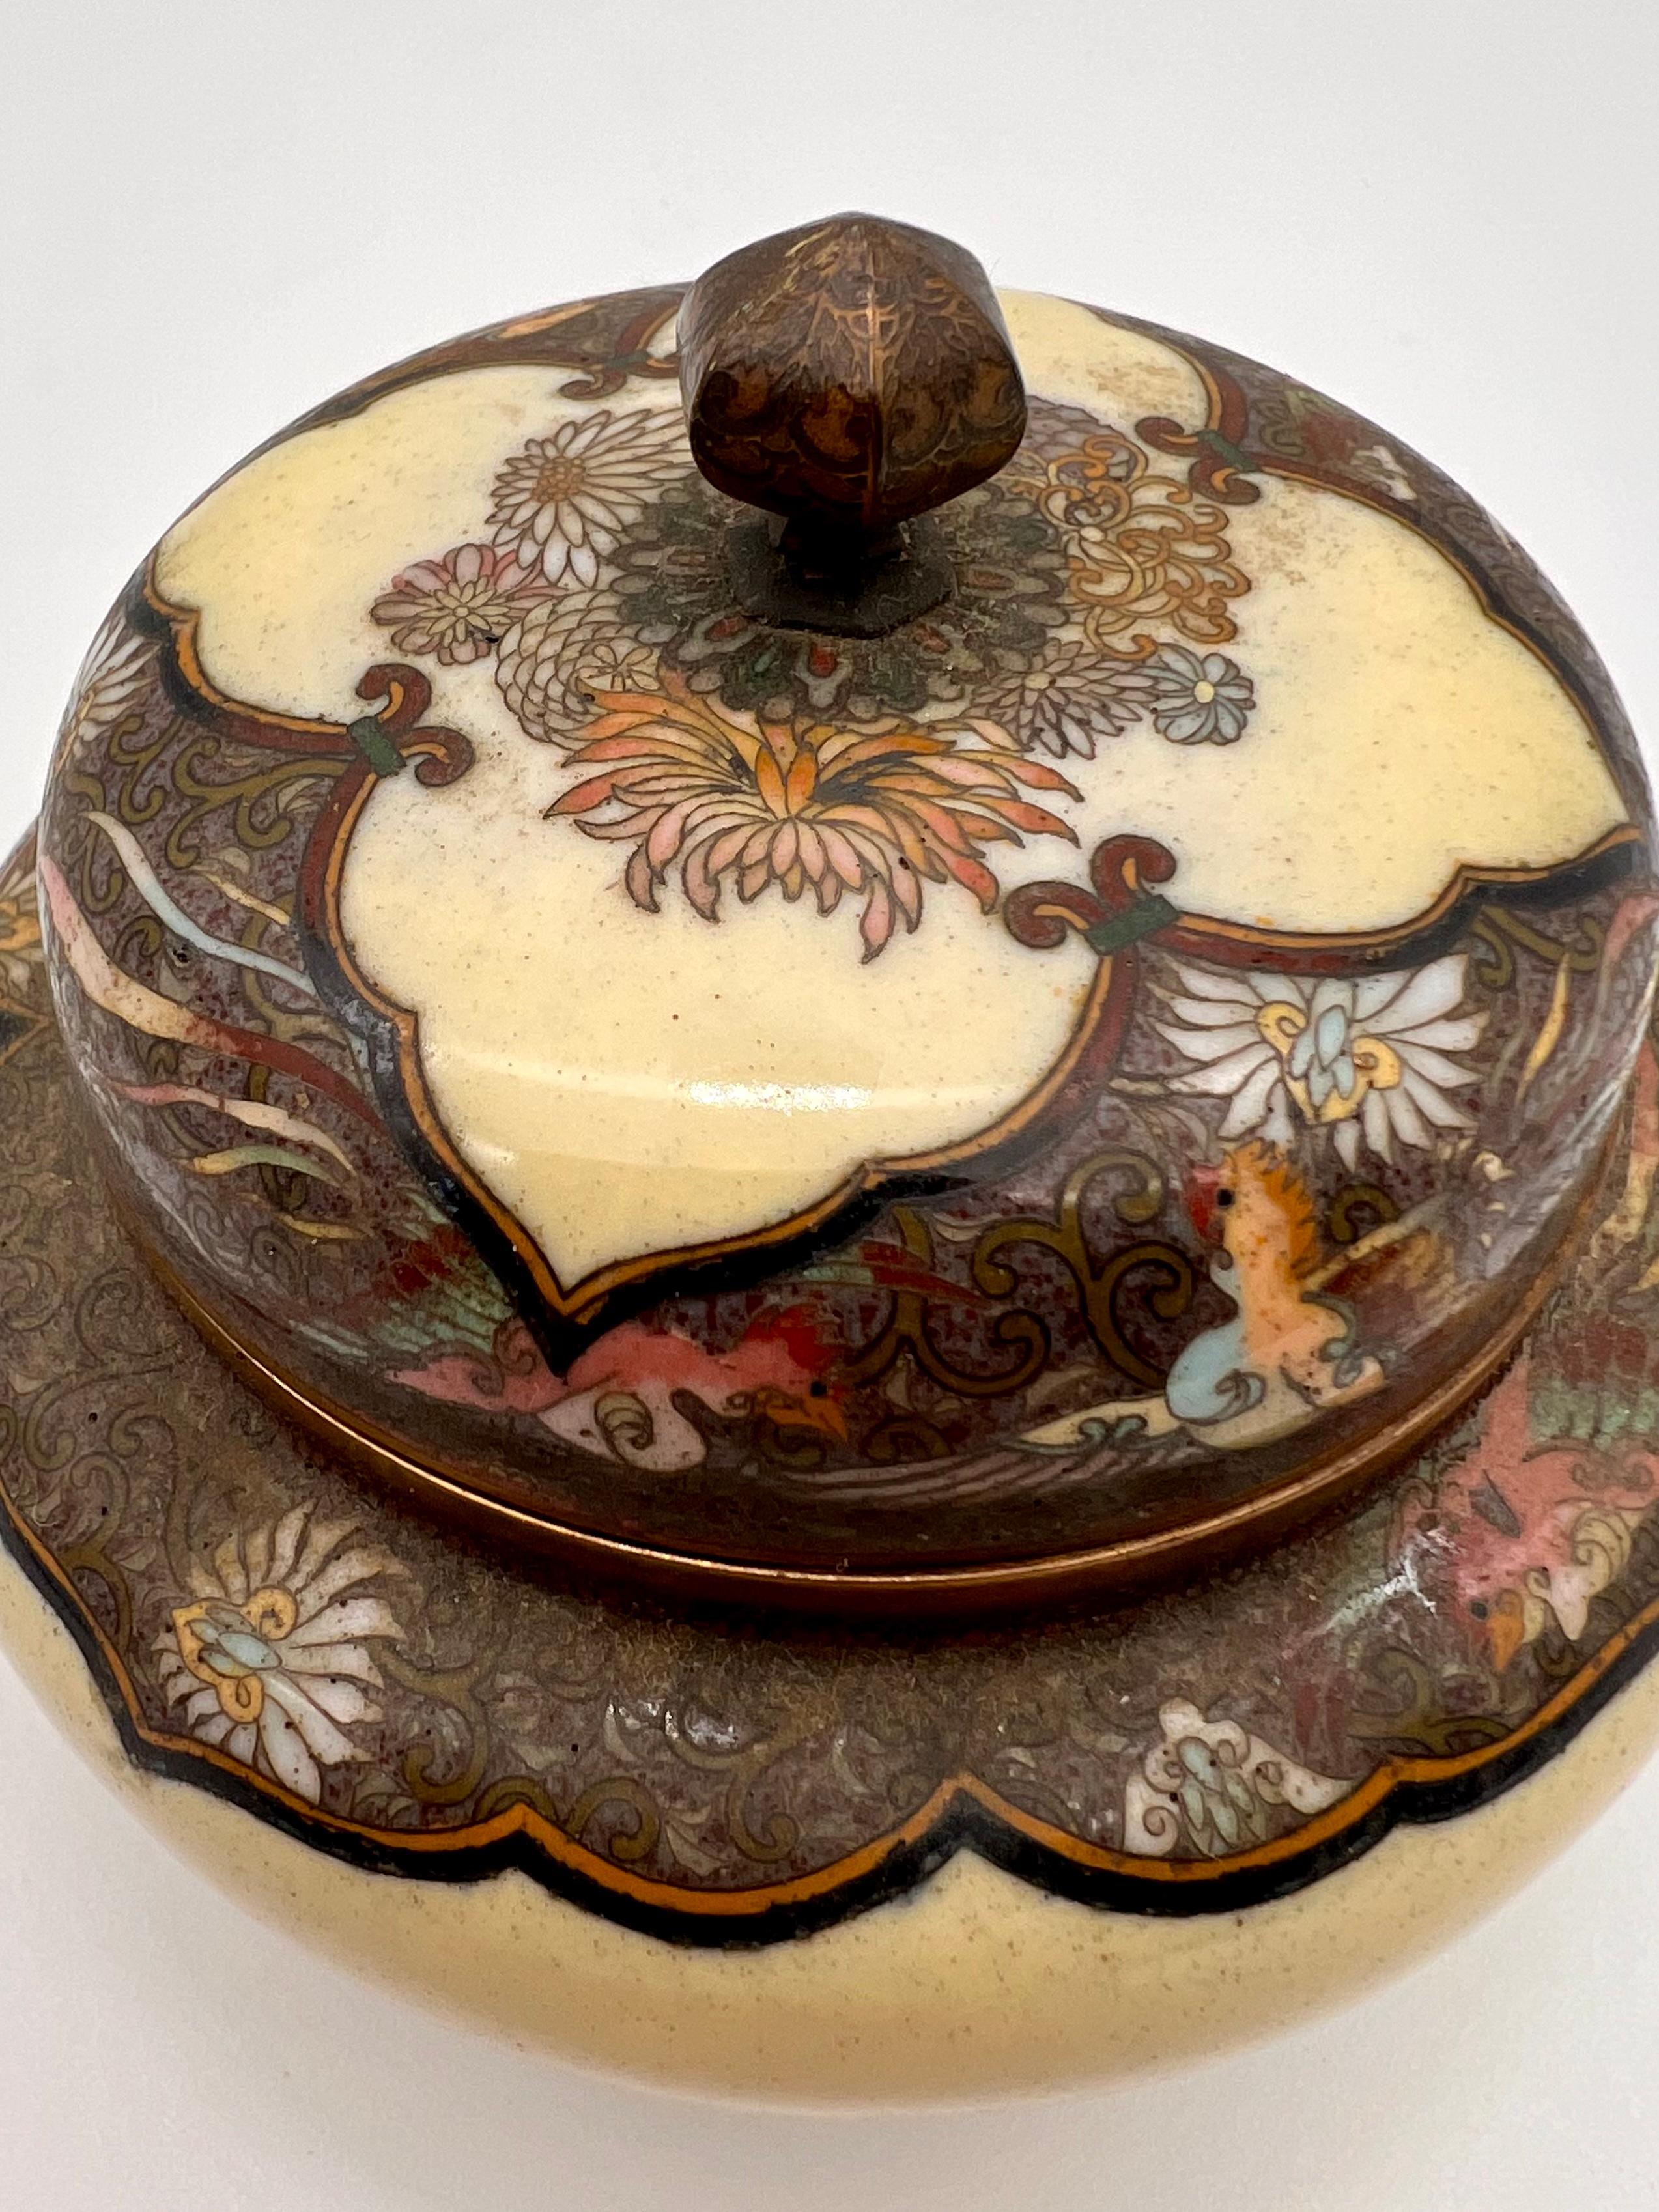 Exquisite Cloisonné Enamel Vase and Cover in the Manner of Namikawa Yasuyuki For Sale 13